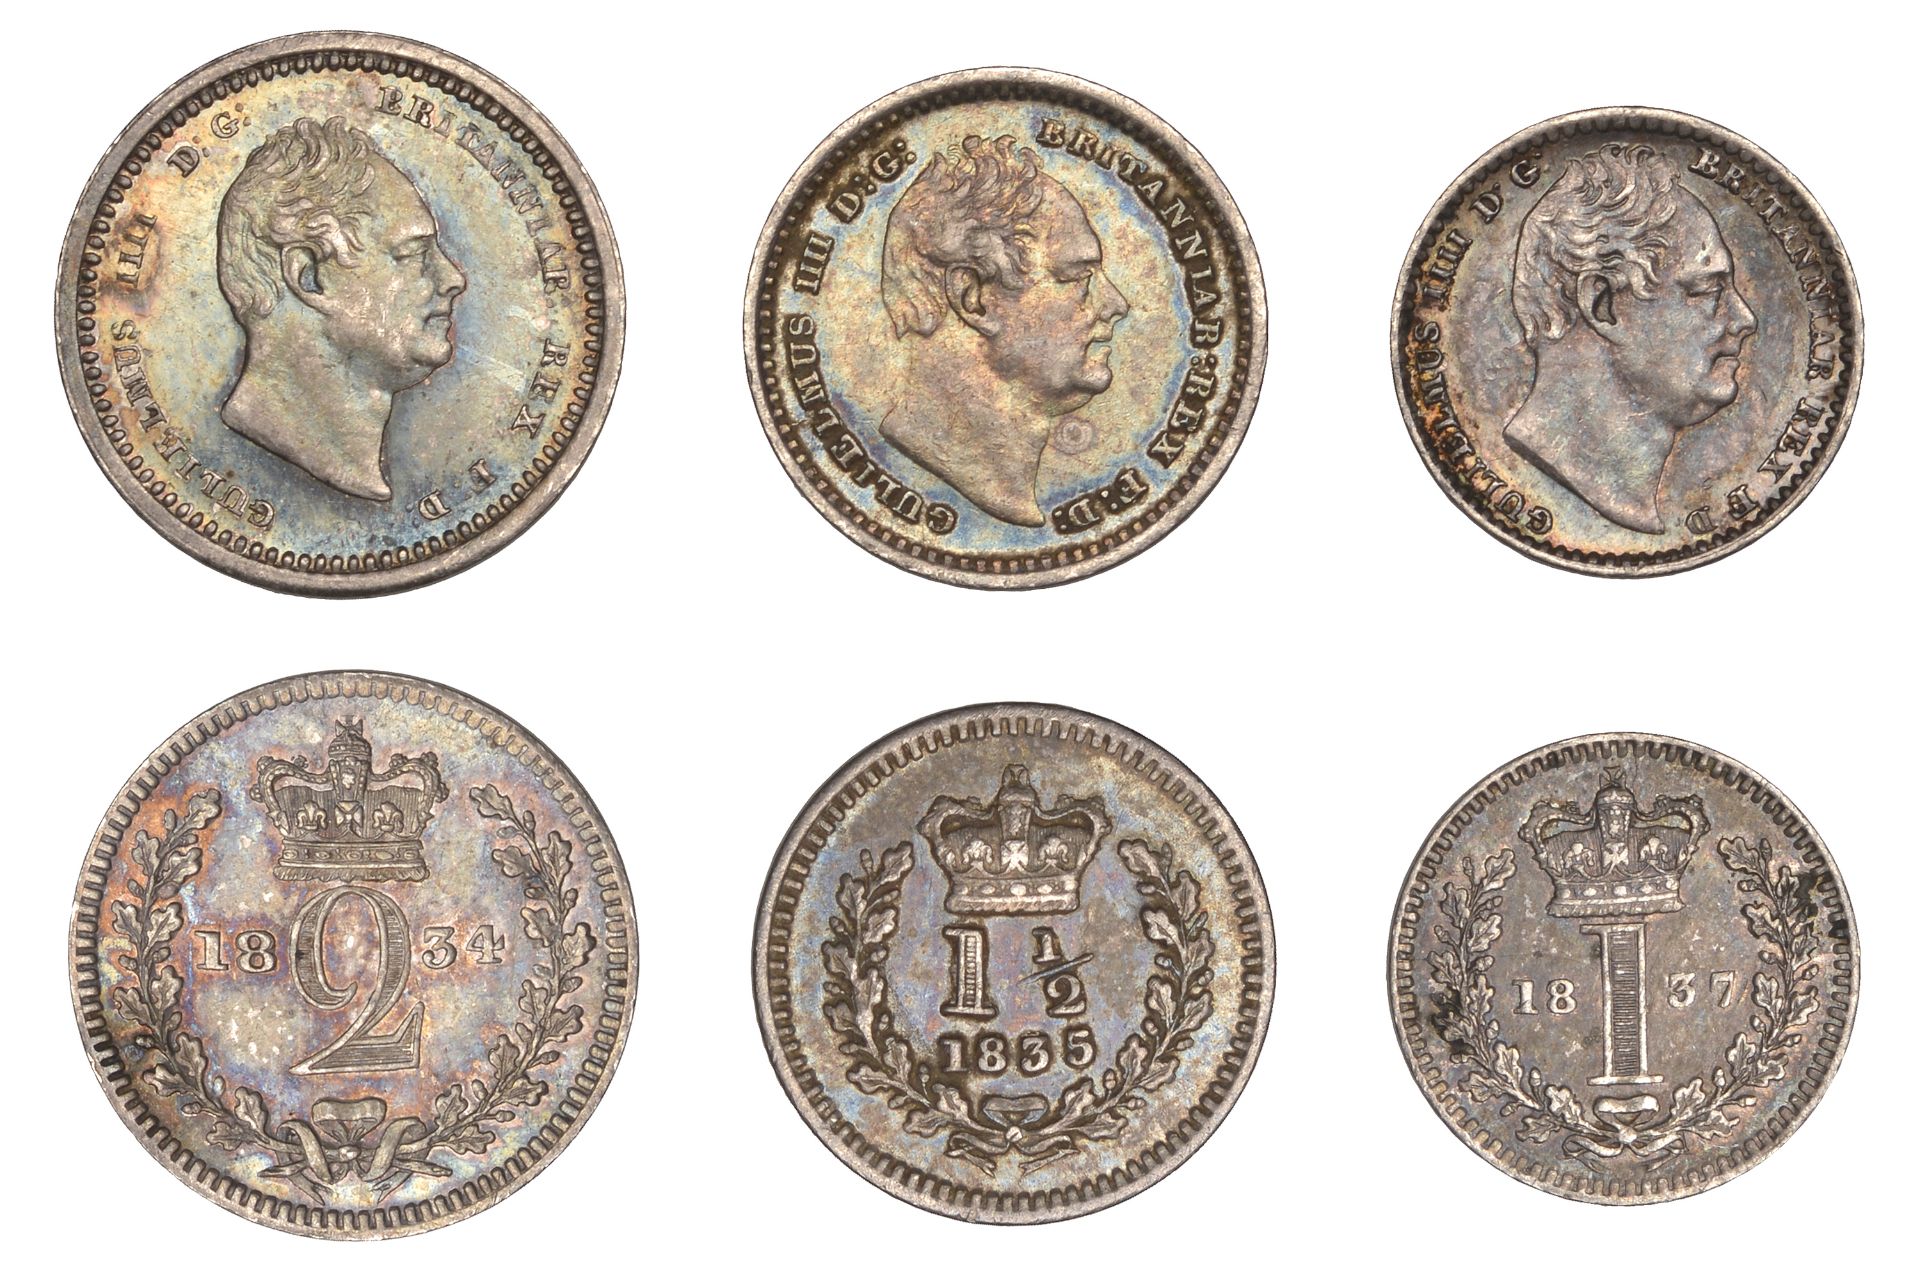 William IV, Maundy Twopence, 1824, Threehalfpence, 1835/4, Maundy Penny, 1837 (S 3839, 3843-...